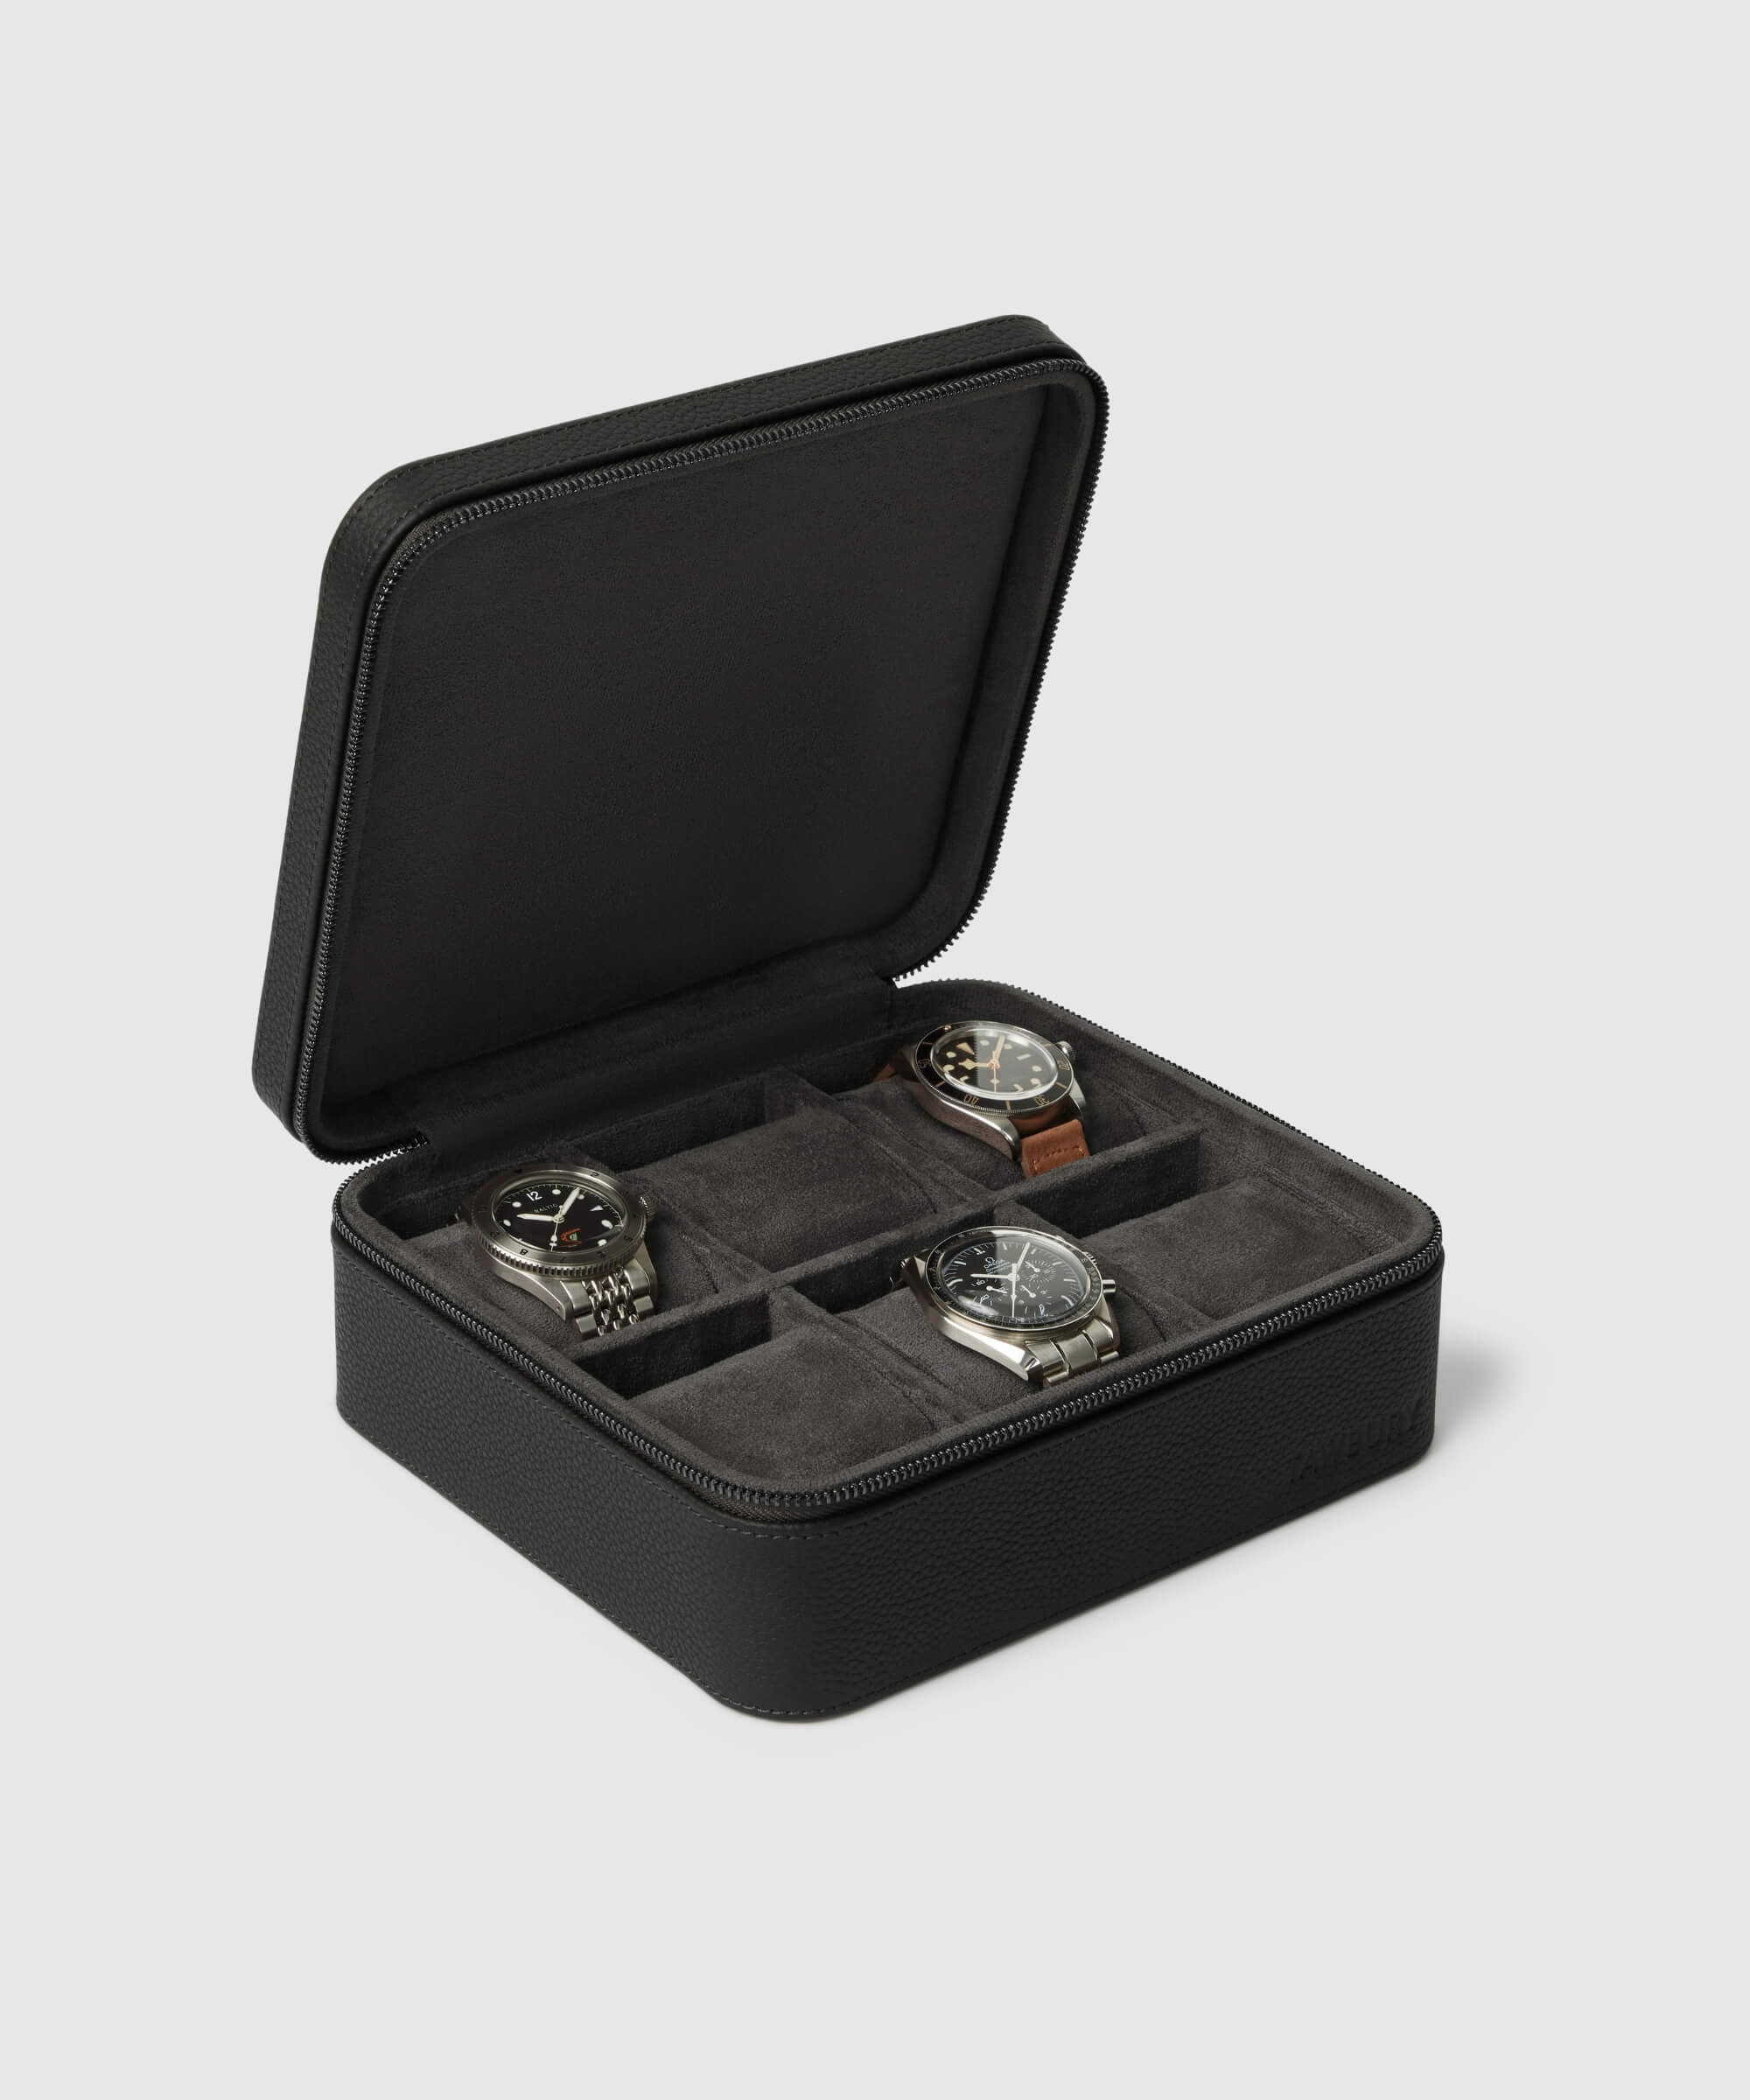 The Fraser 6 Watch Travel Case - Black (Coming Soon), a luxury leather watch case from the TAWBURY range, features a black exterior and padded interior with individual compartments for three watches, displayed against a plain background.